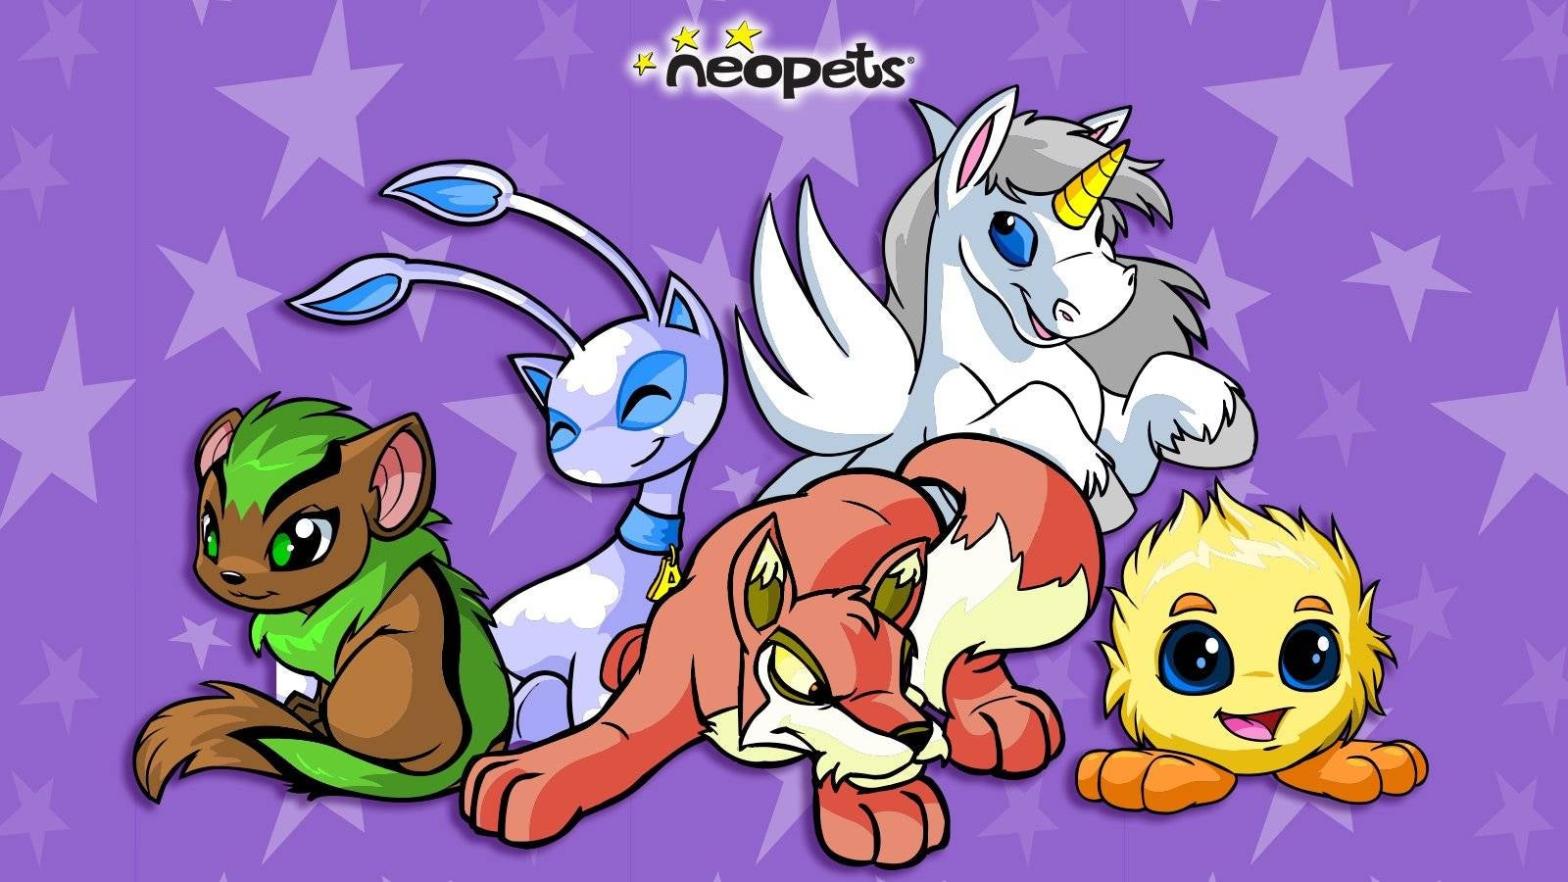 Graphic: Neopets